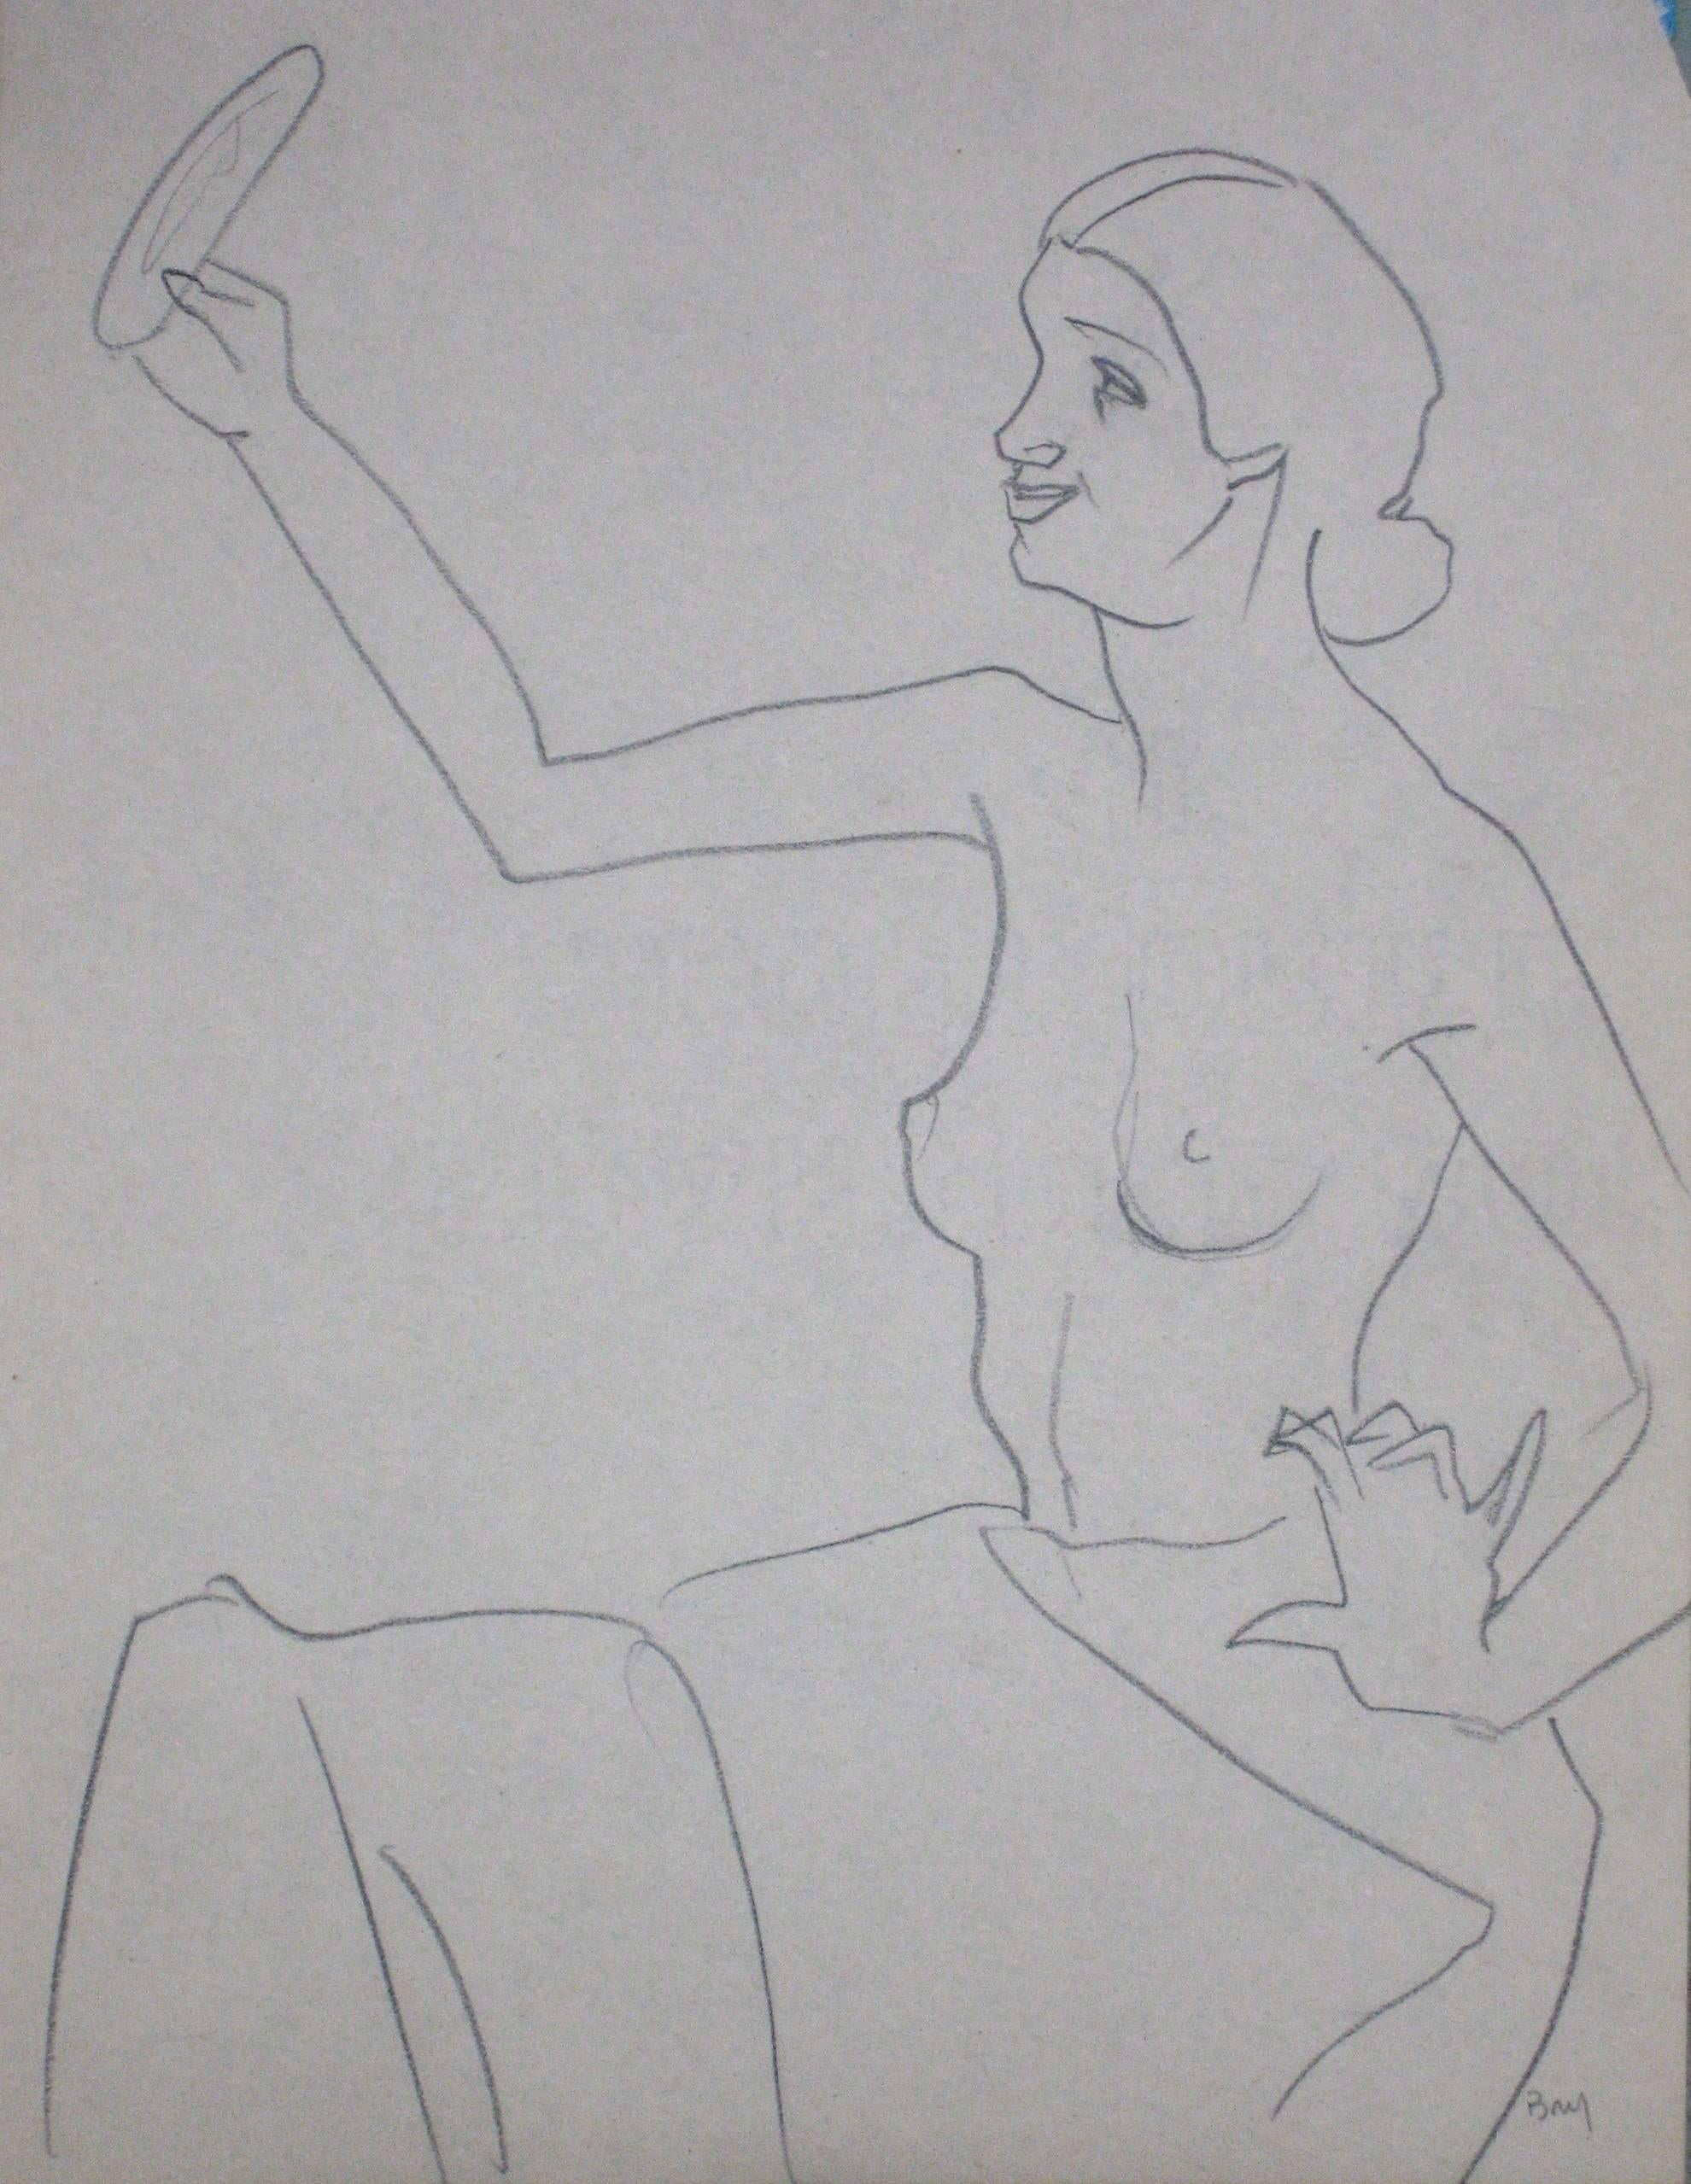 Seated Figure with Mirror, Graphite on Paper, Circa 1930s - Art by Edith Bry